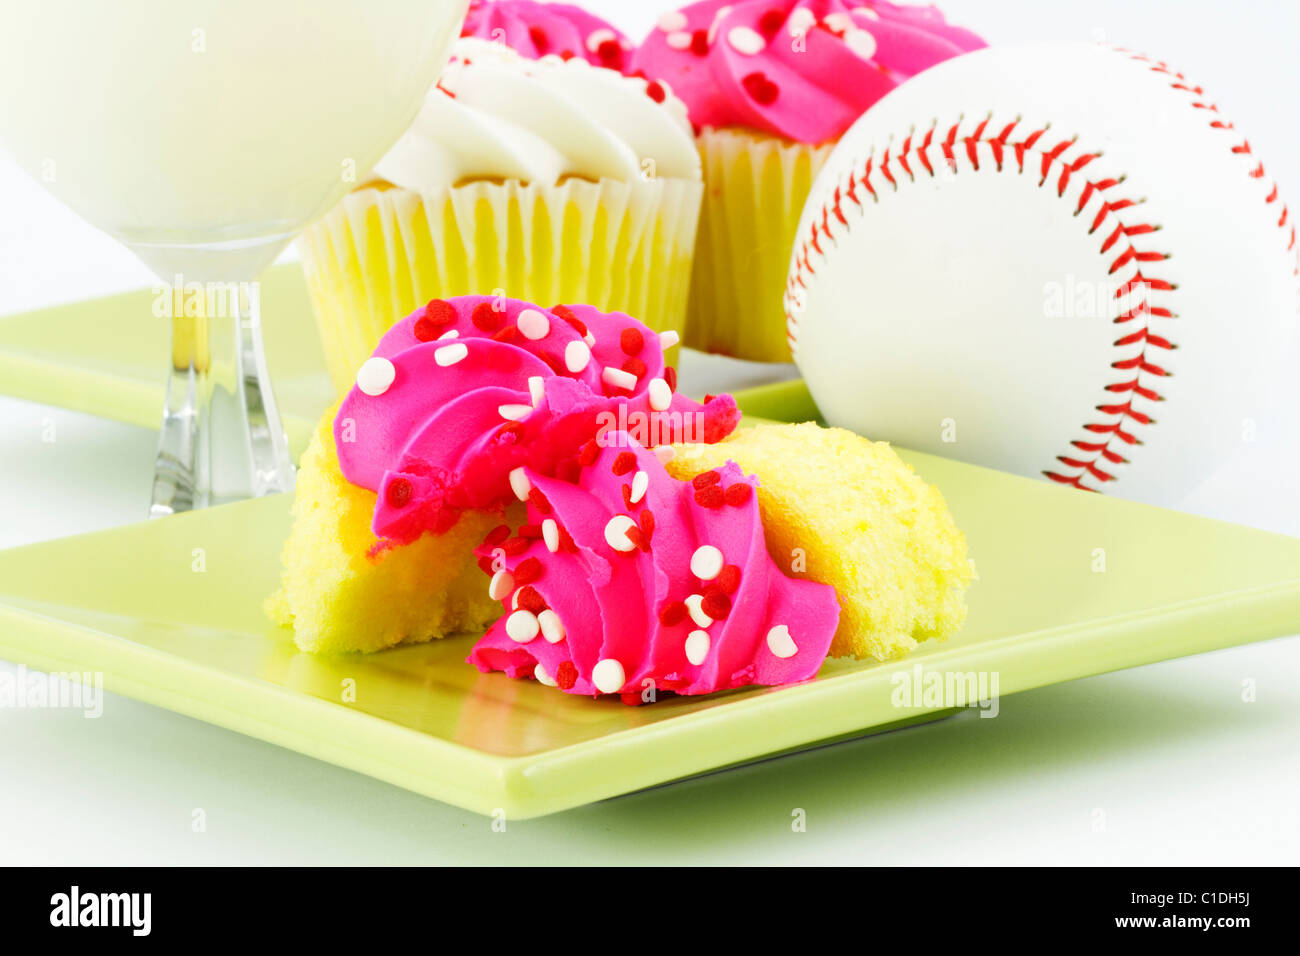 Vanilla cupcakes with pink icing, white milk, and a baseball suggest a festive, after game celebration. Stock Photo